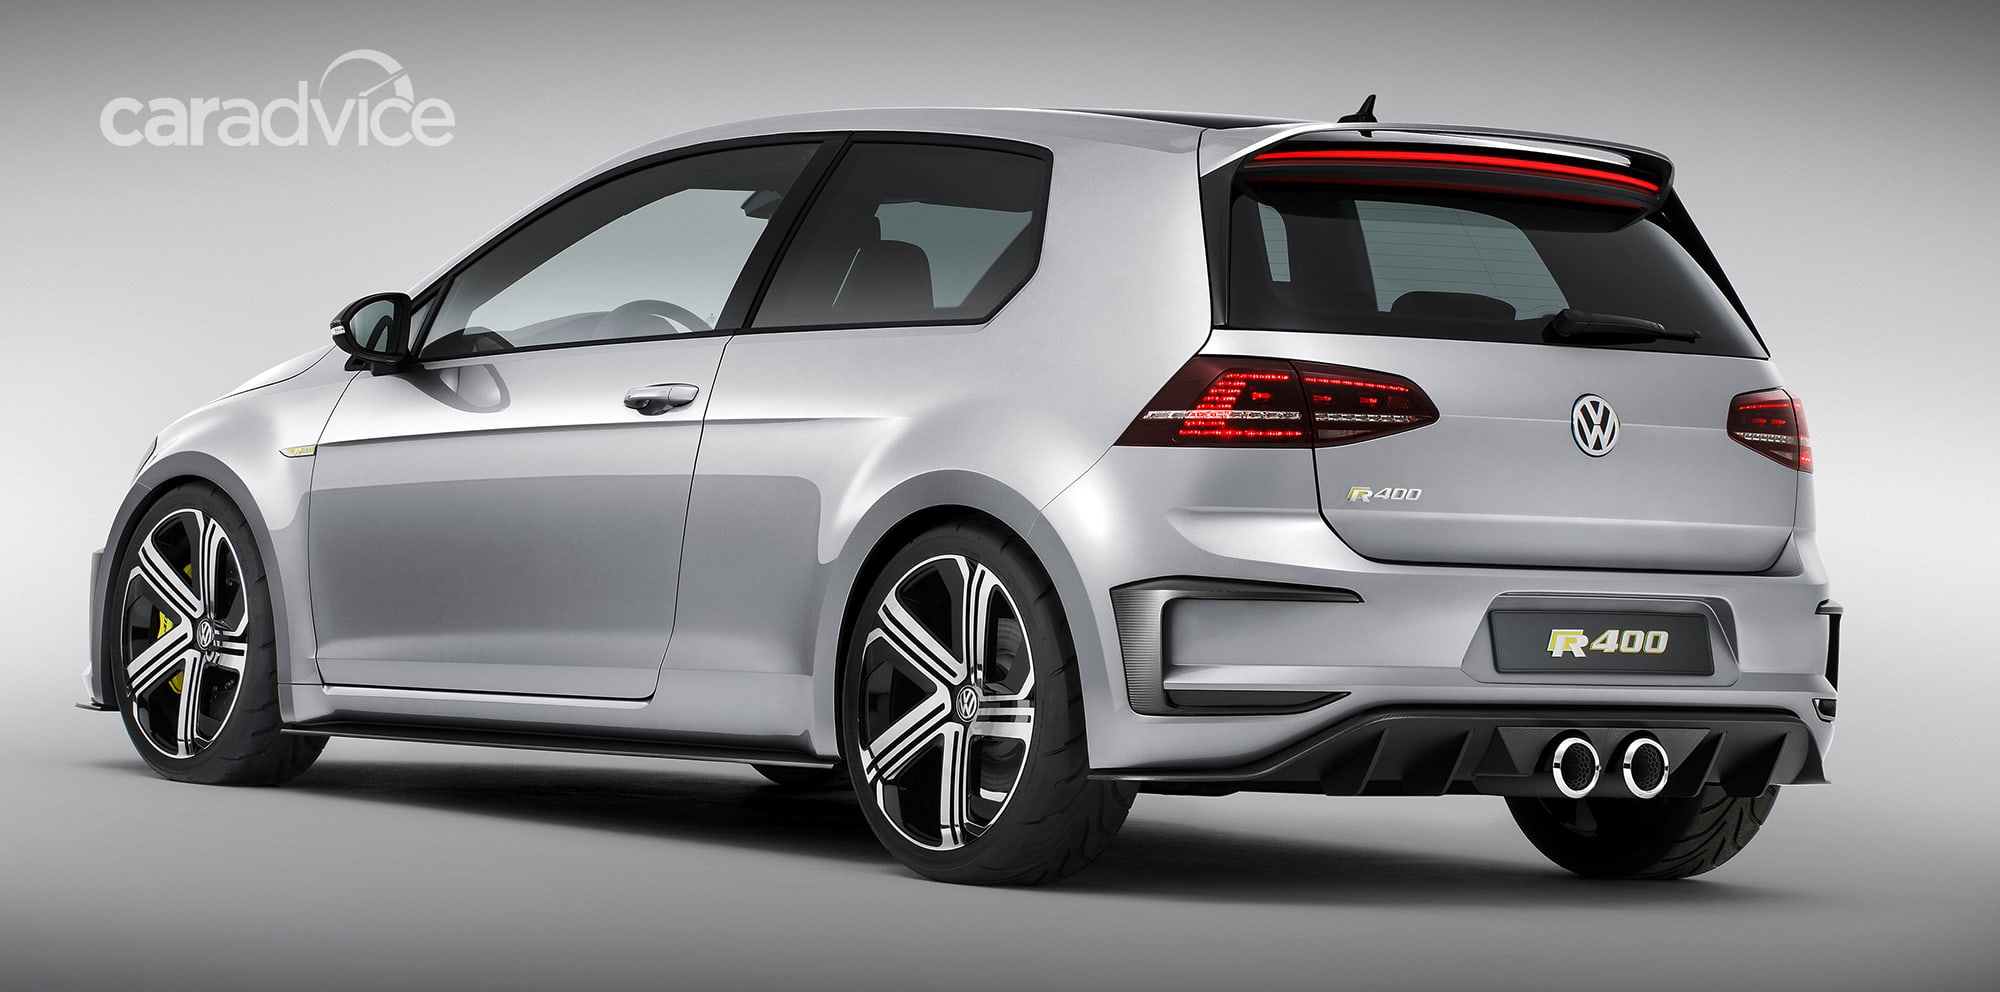 Volkswagen Golf R400 being readied for late 2015 launch - report ...